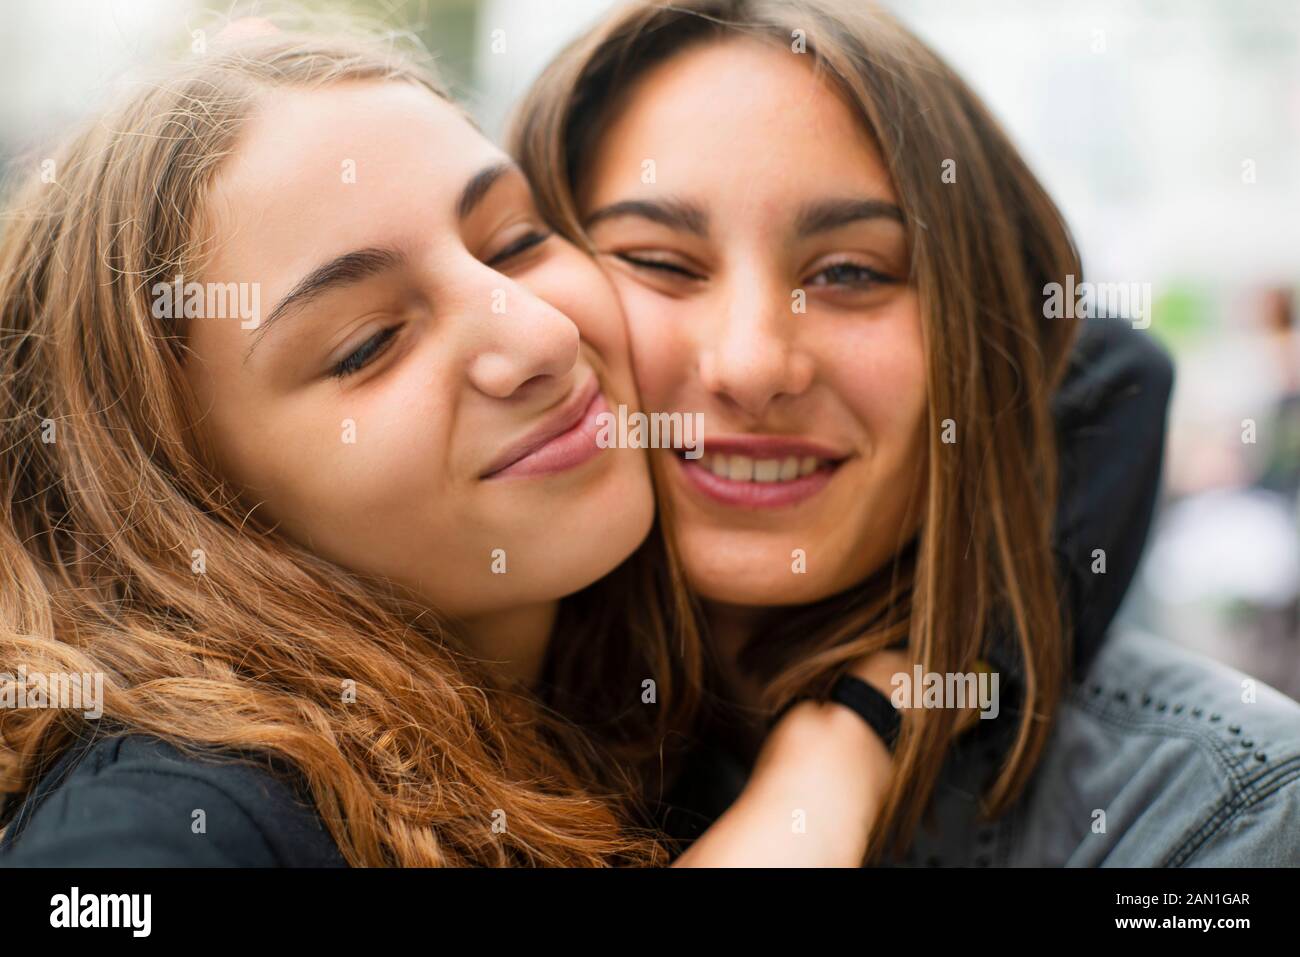 Friends embracing outdoors Stock Photo